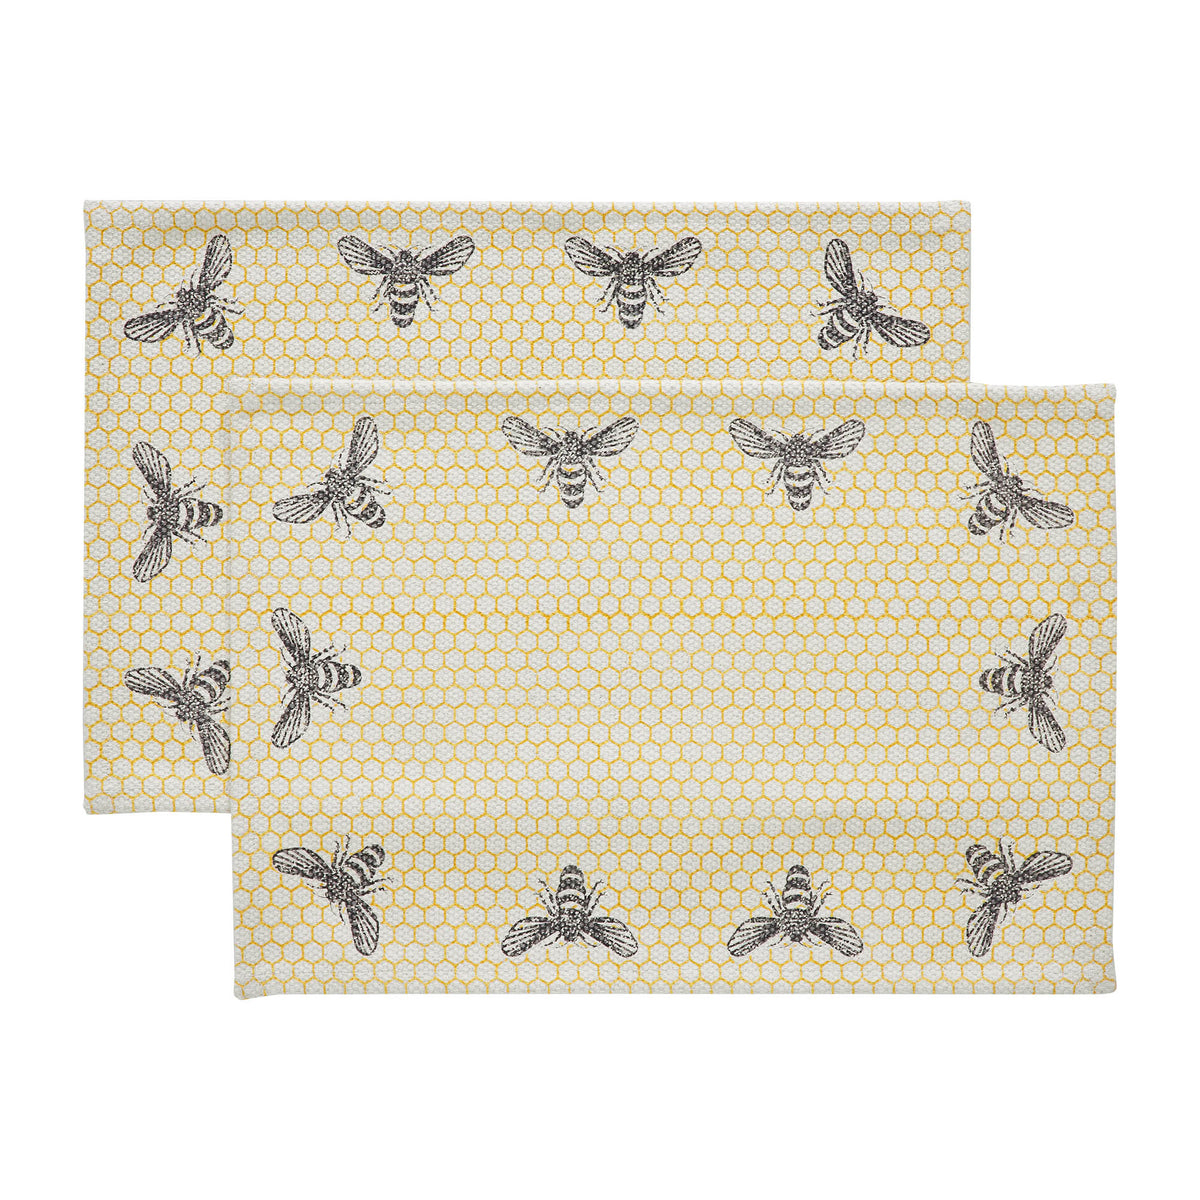 Buzzy Bees Placemat Set of 2 13x19